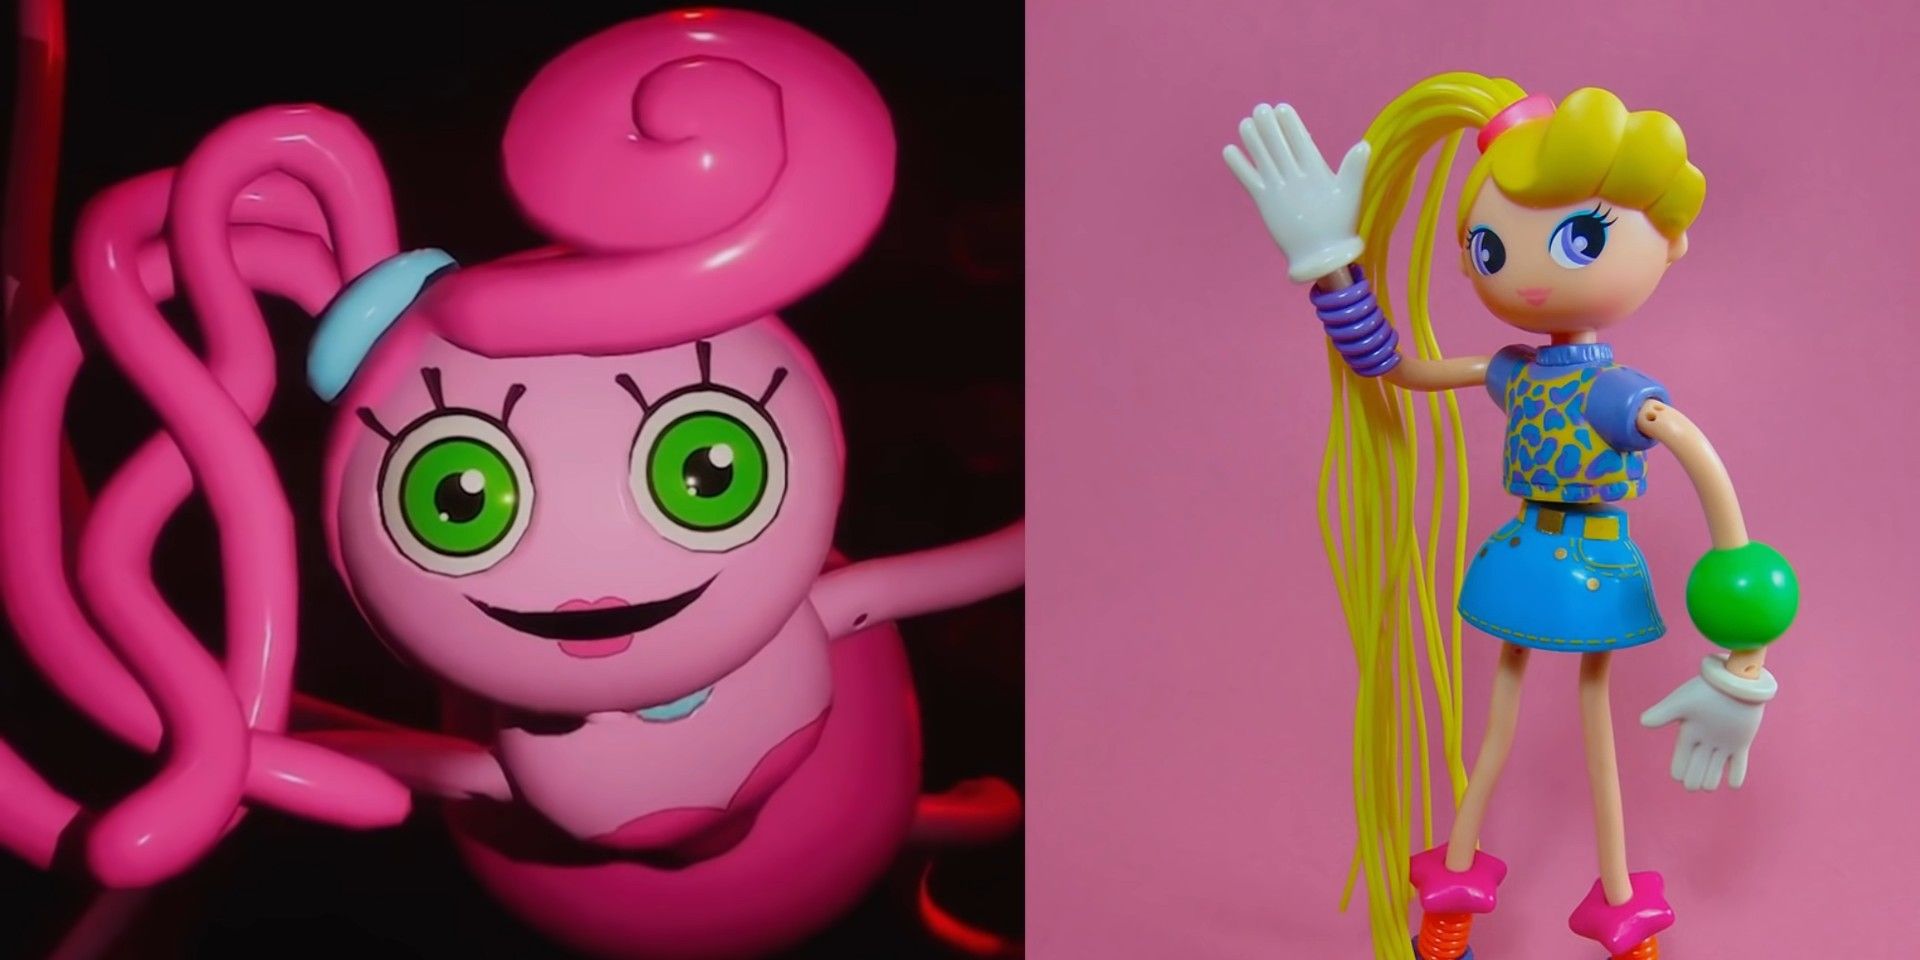 Poppy Playtime Fans Think Mommy Long Legs Is Based On 1990s Doll